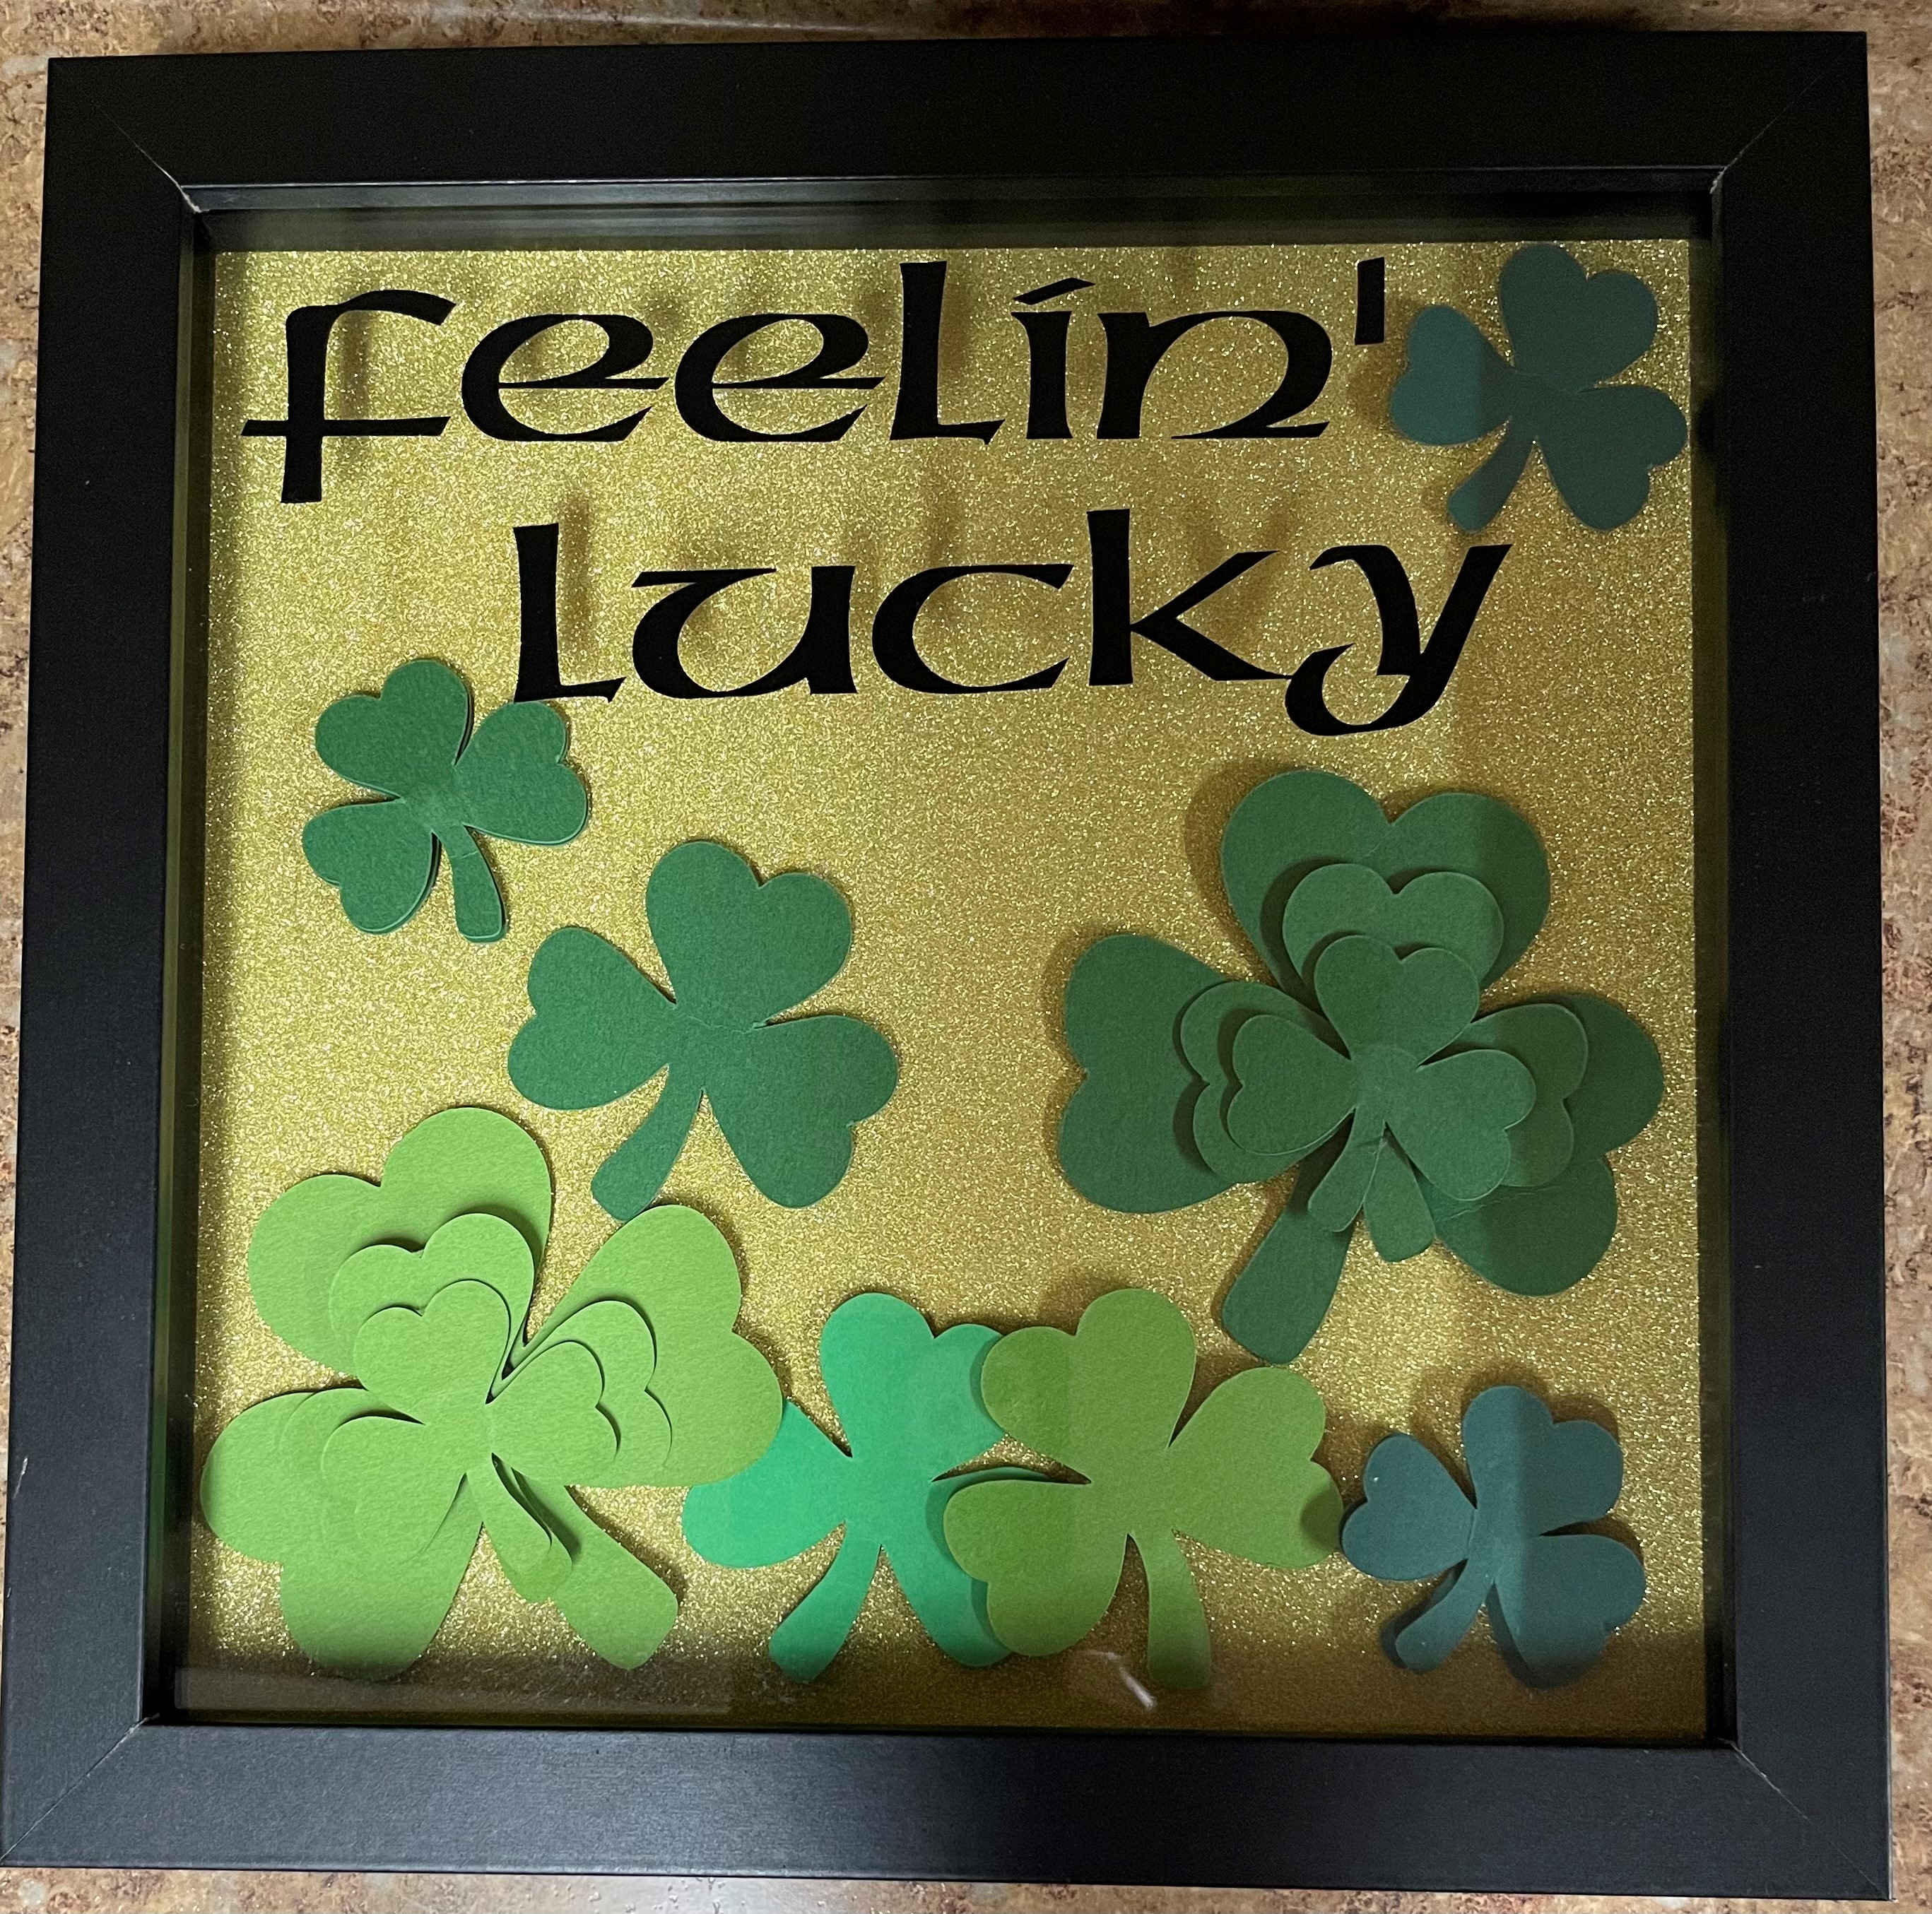 "Feeling Lucky" with shamrocks and a gold background in a shadow box